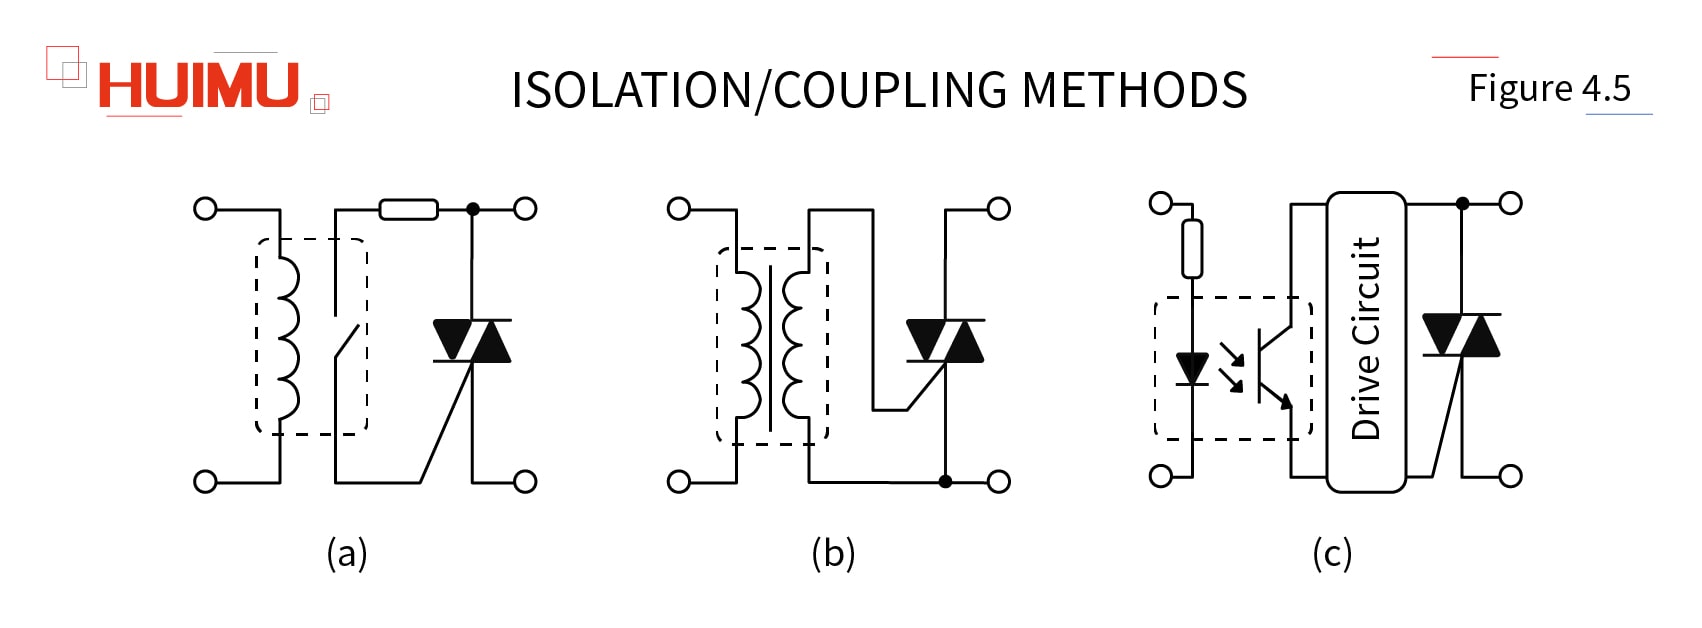 Isolation / coupling methods for solid state relays